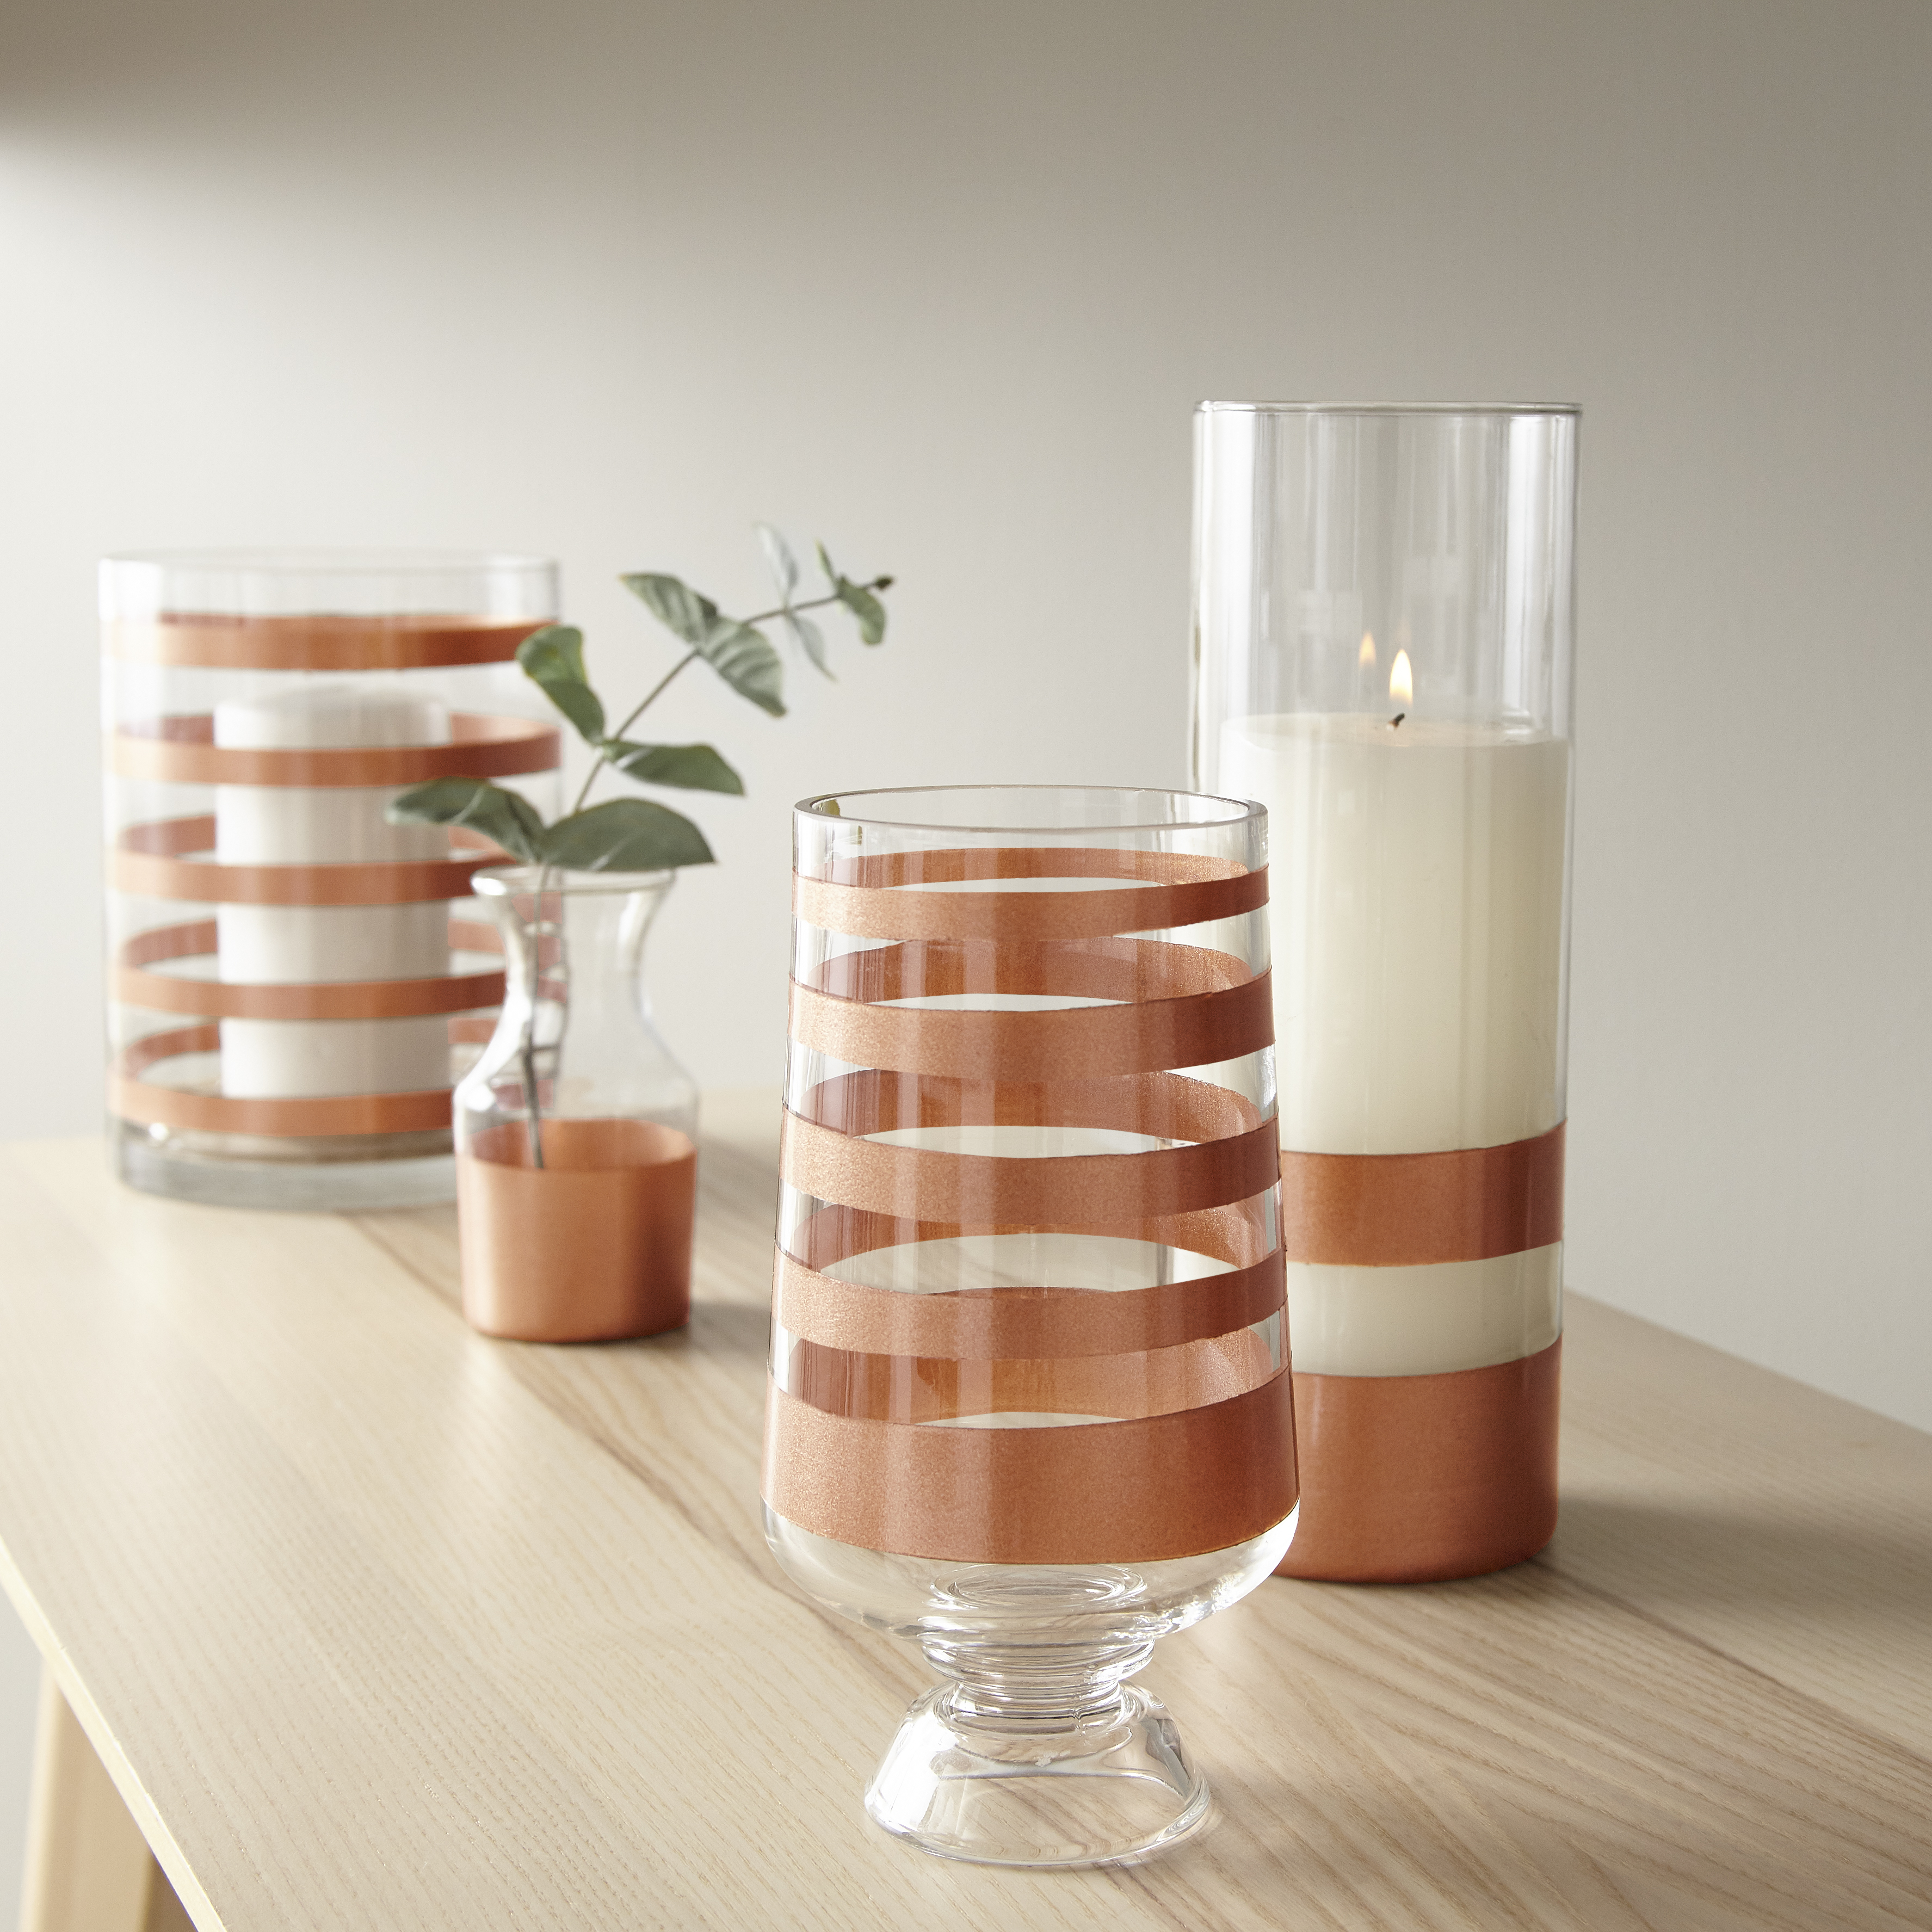 Four clear vases with spray painted striped designs in a metallic copper colour